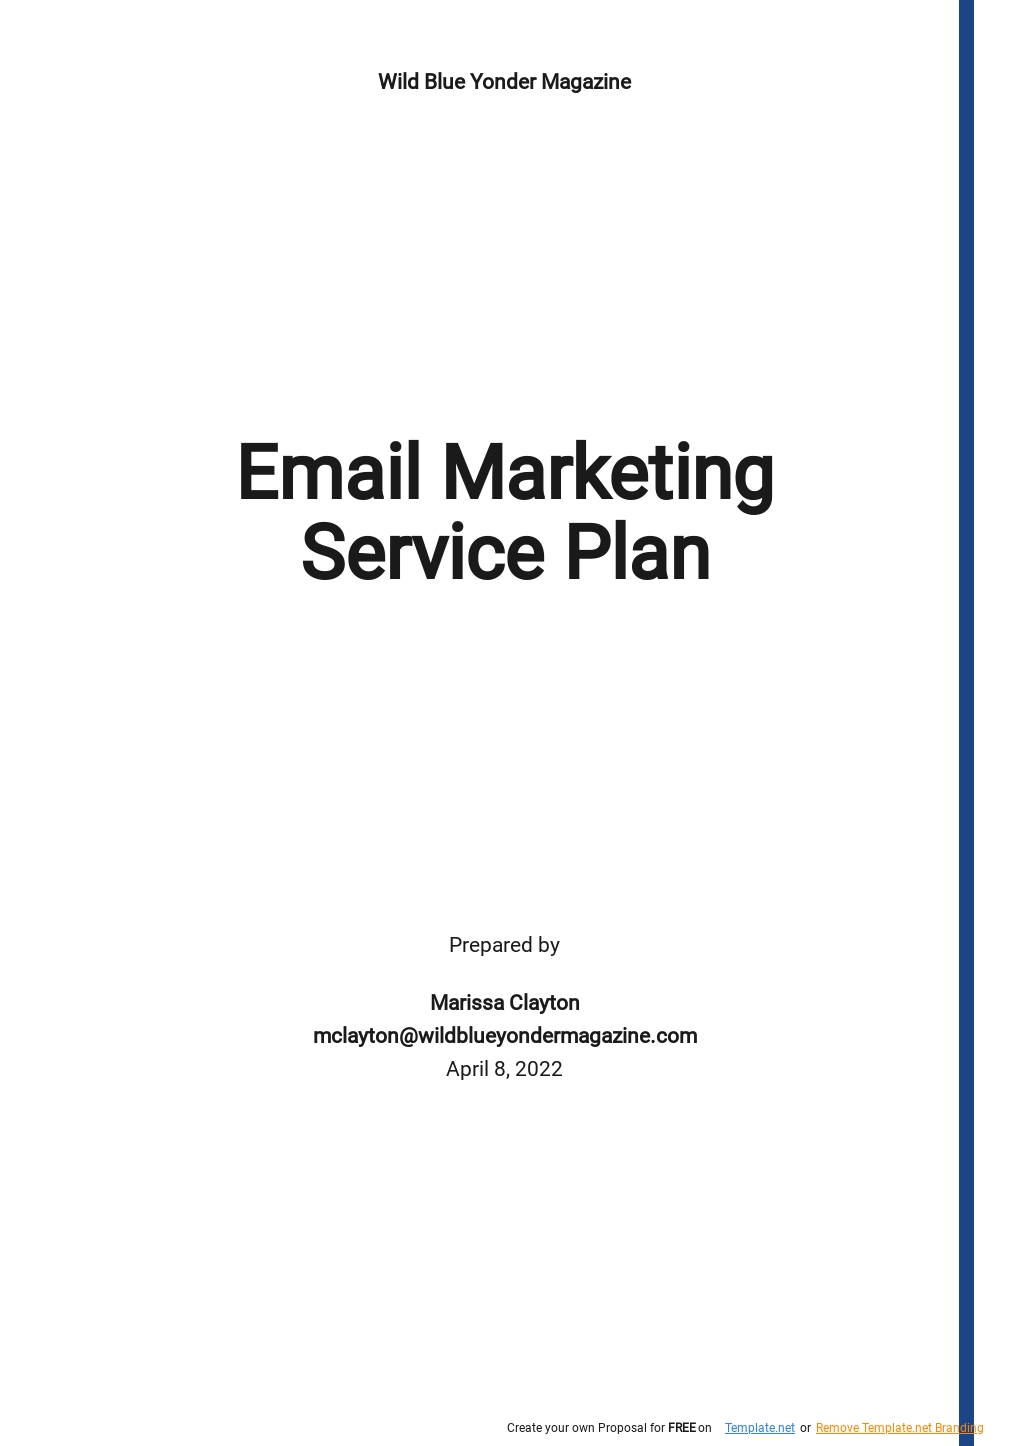 Email Marketing Service Plan Template